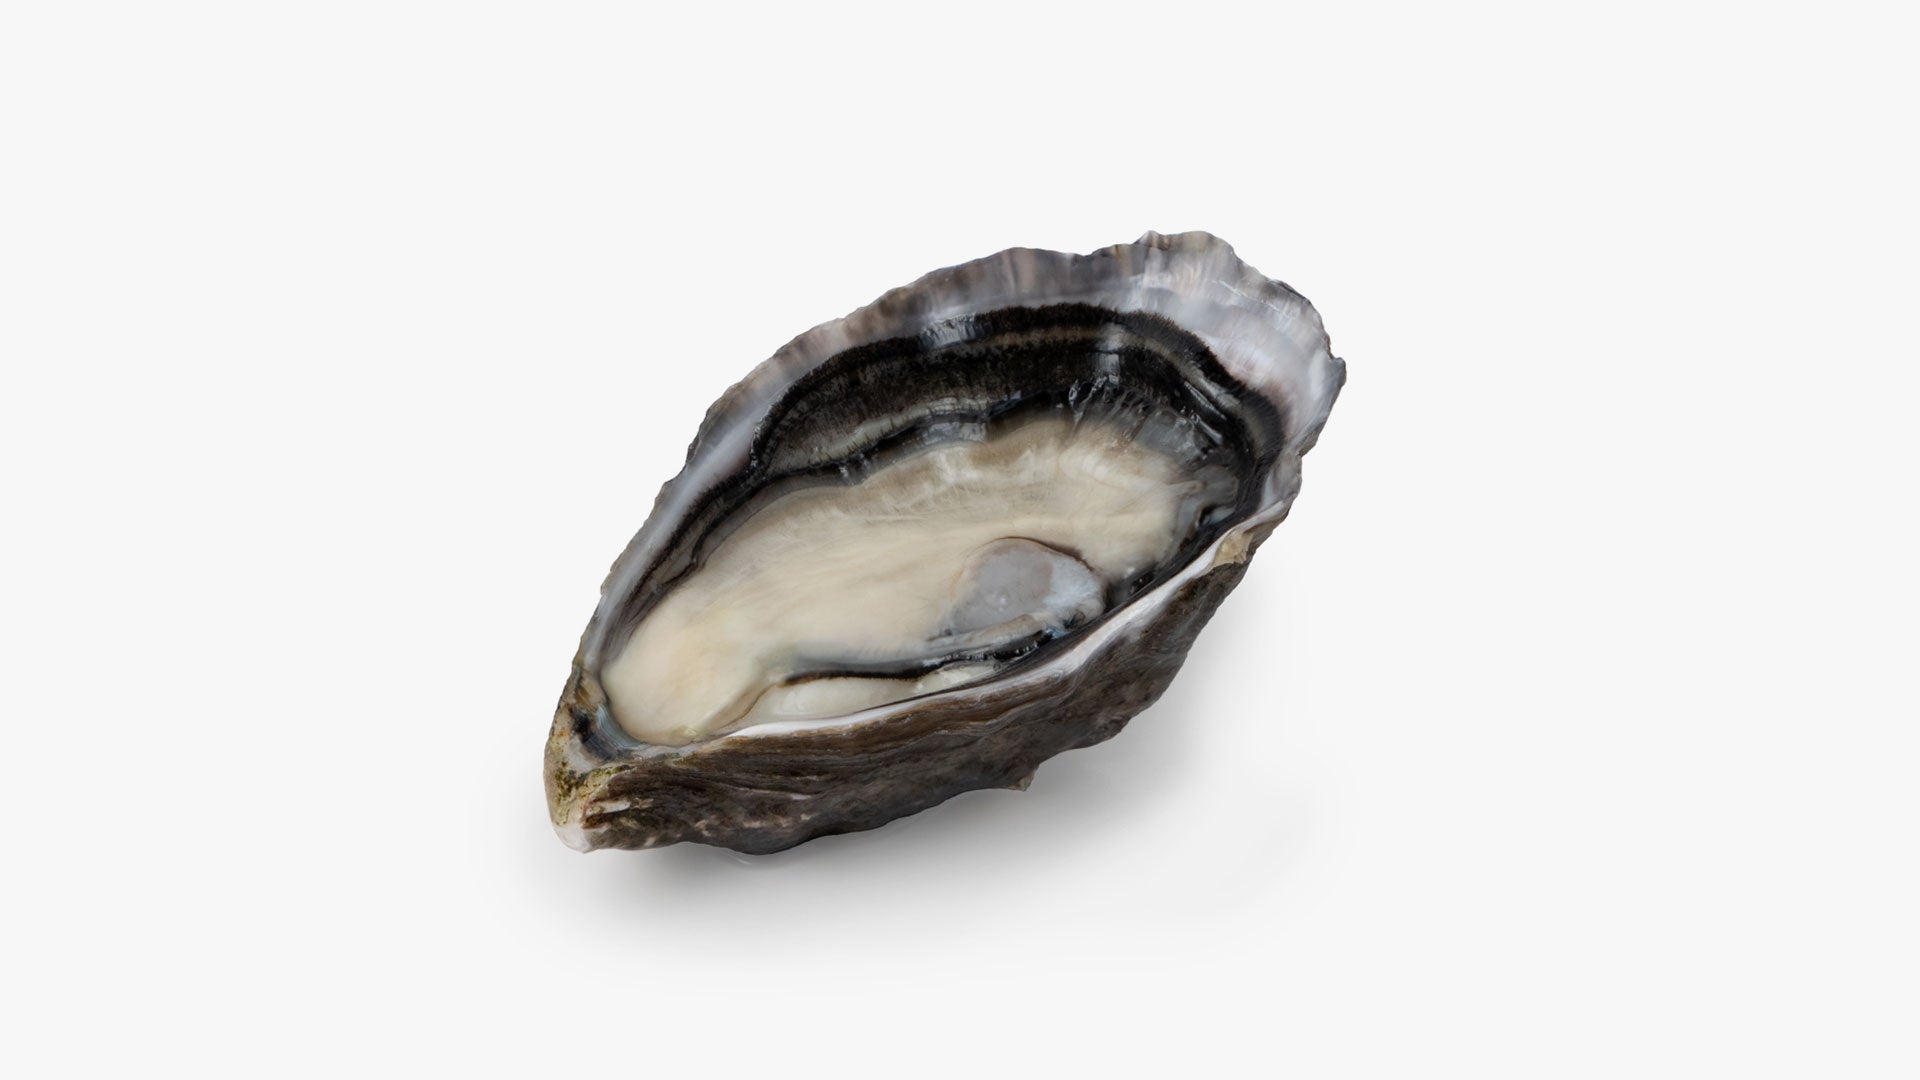 Pacific oyster pots